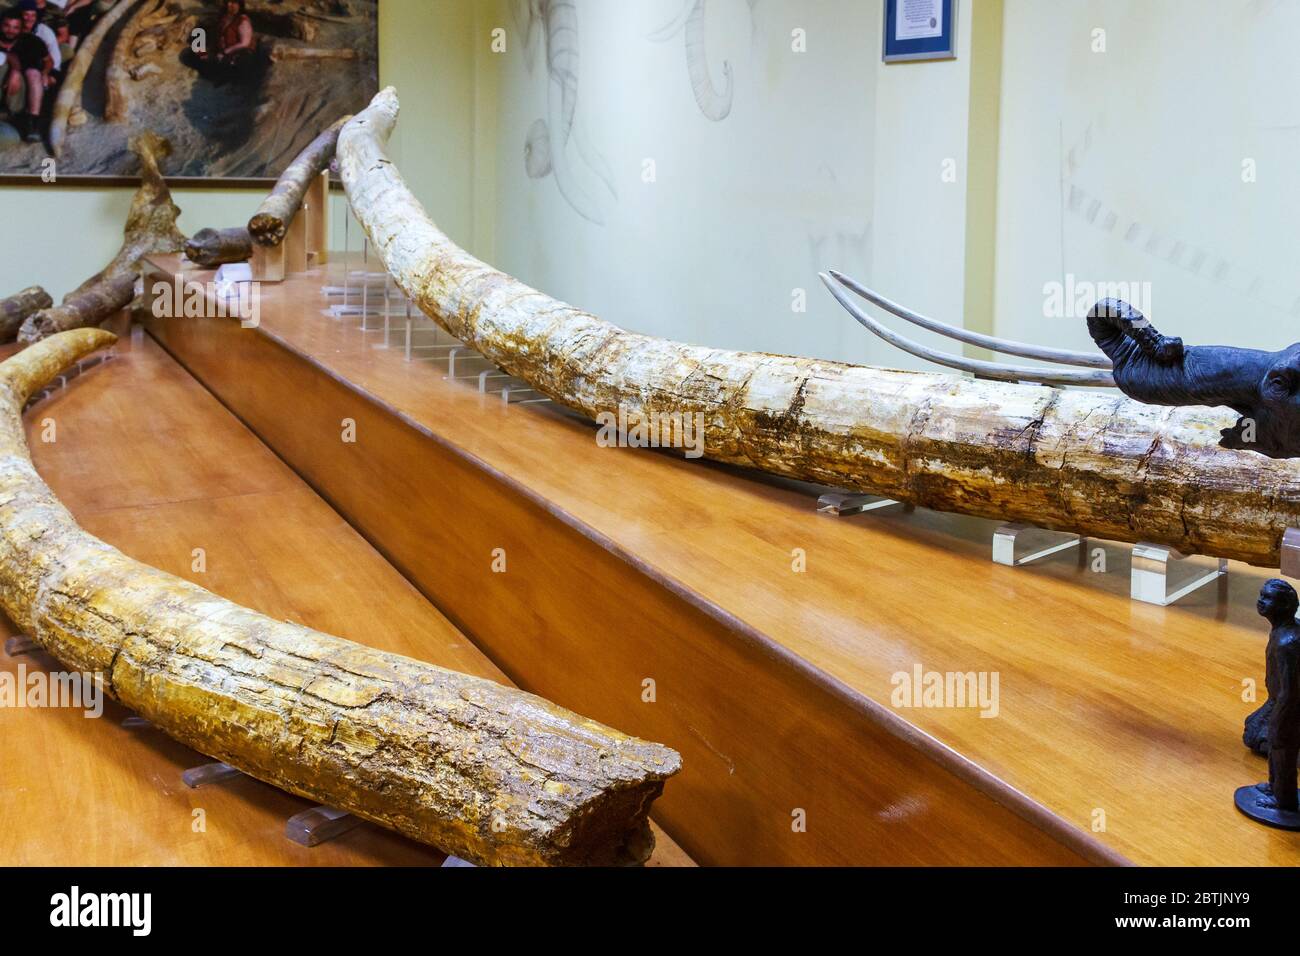 Two mastodon tusks exposed in Milia, Grevena, Greece. They are 5.02 metres in length, the largest ever found as confirmed by Guinness Records. Stock Photo